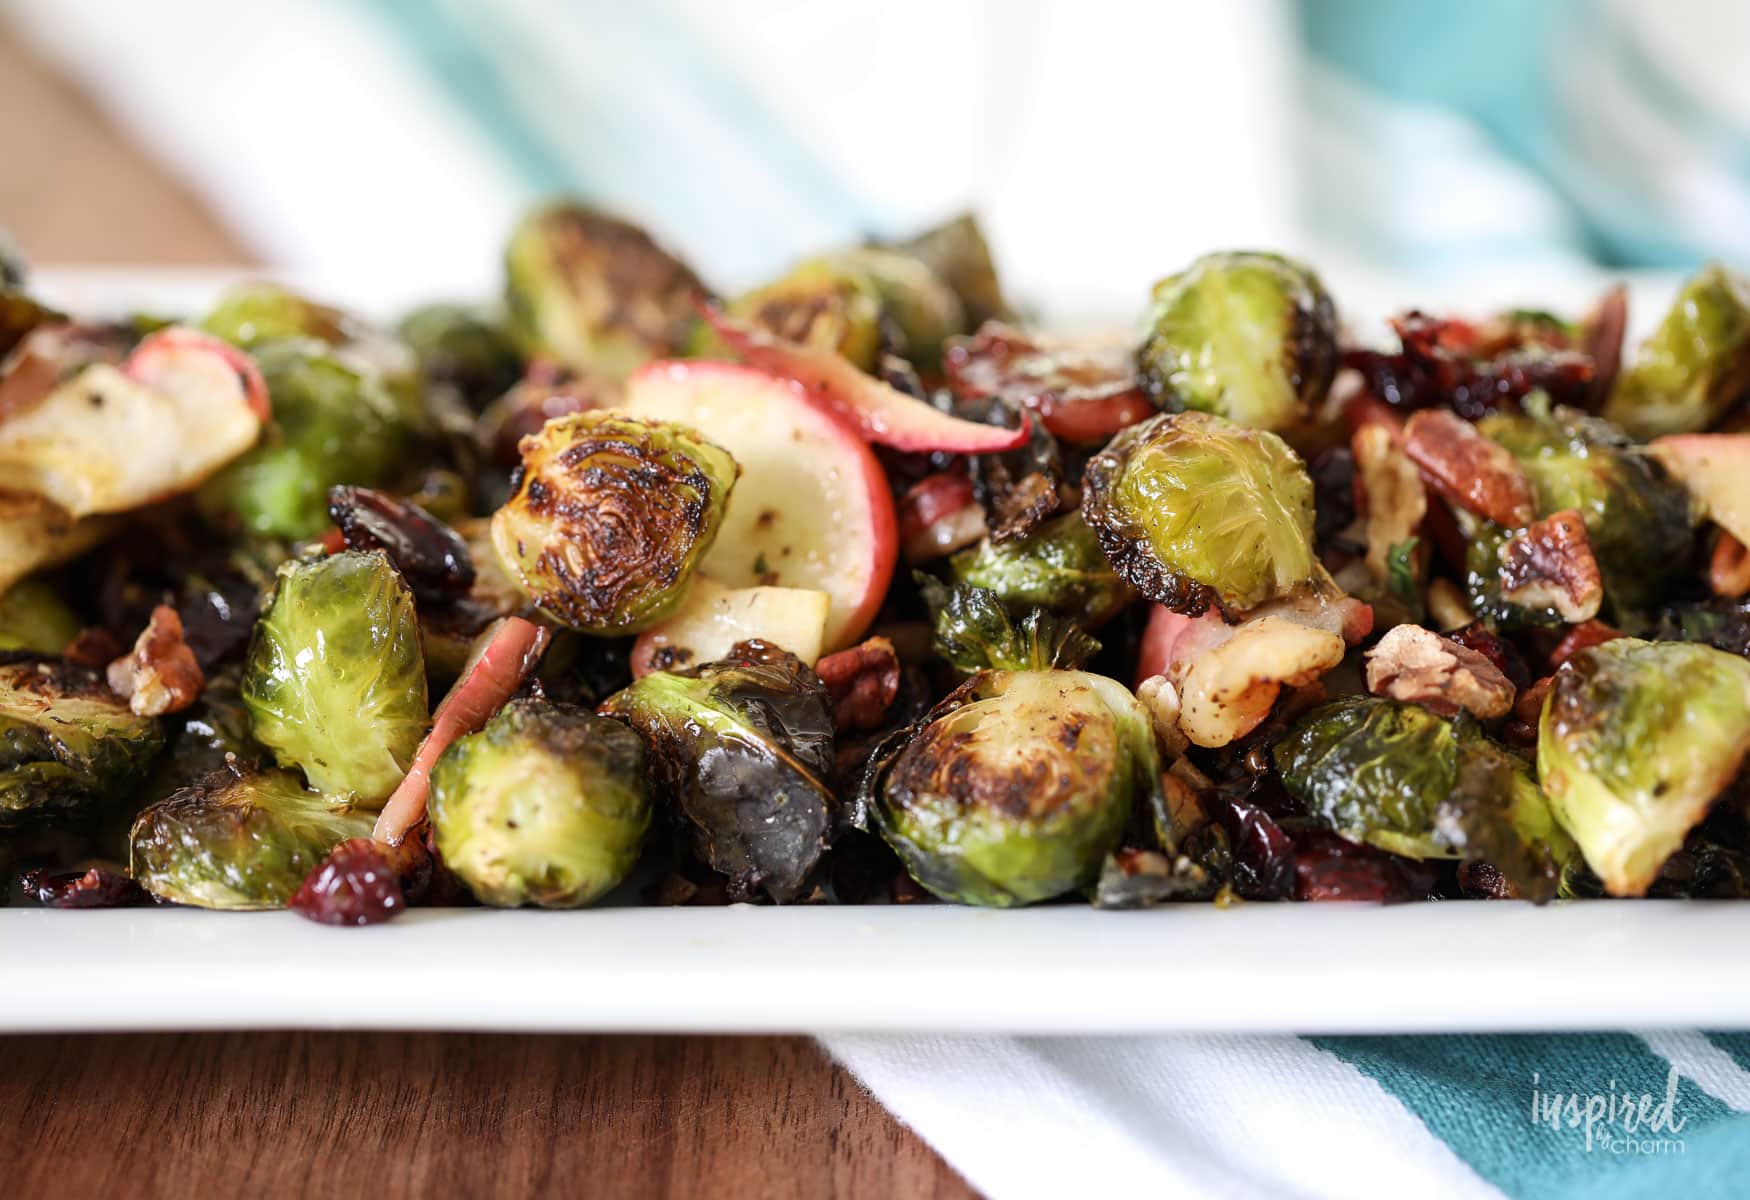 Roasted Brussels Sprouts Recipe for Fall